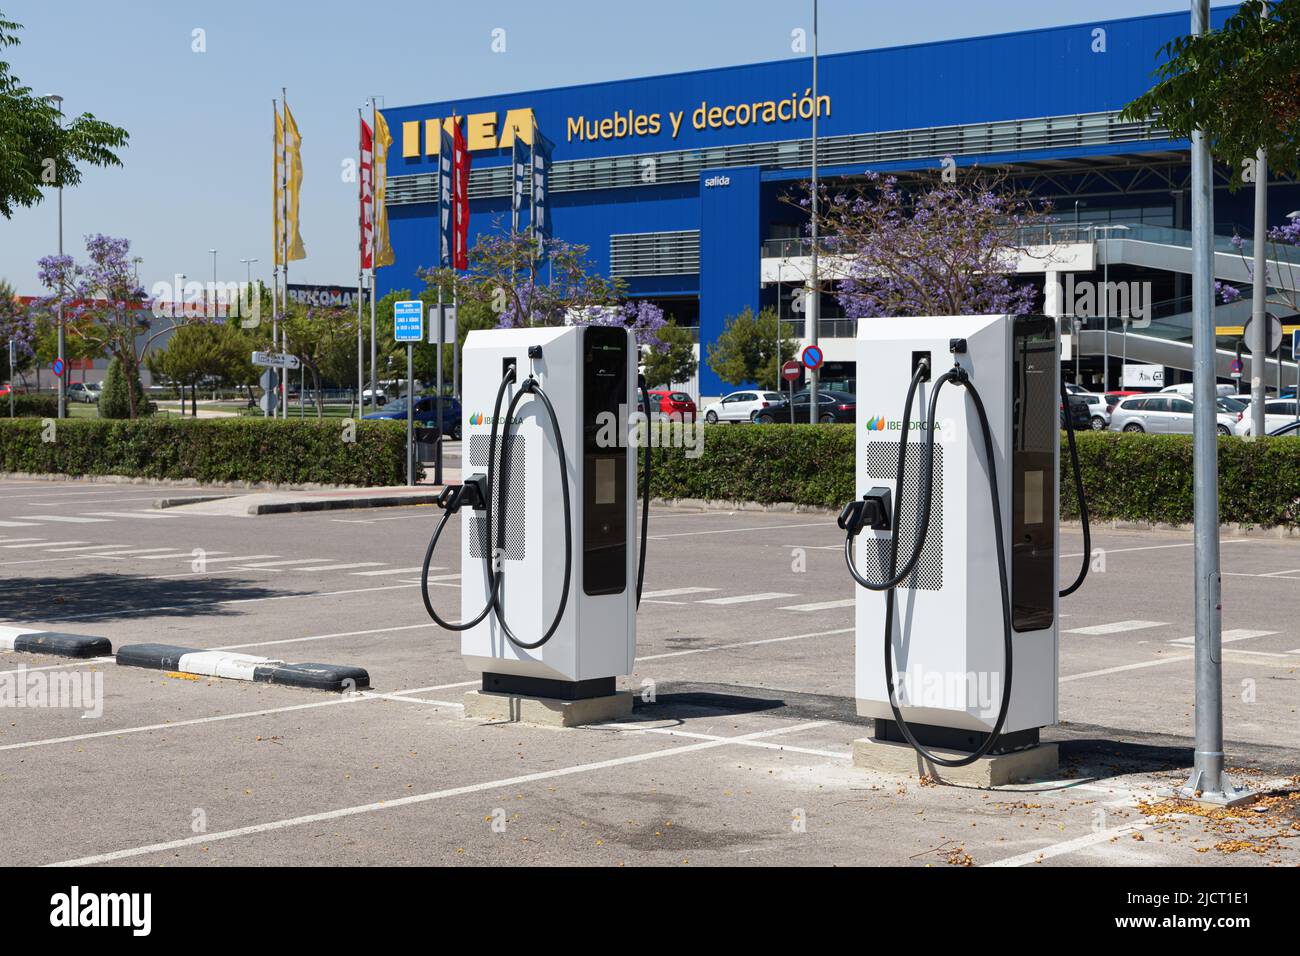 ALFAFAR, SPAIN - JUNE 06, 2022: Electric car charging station powered by Iberdrola near Ikea store Stock Photo